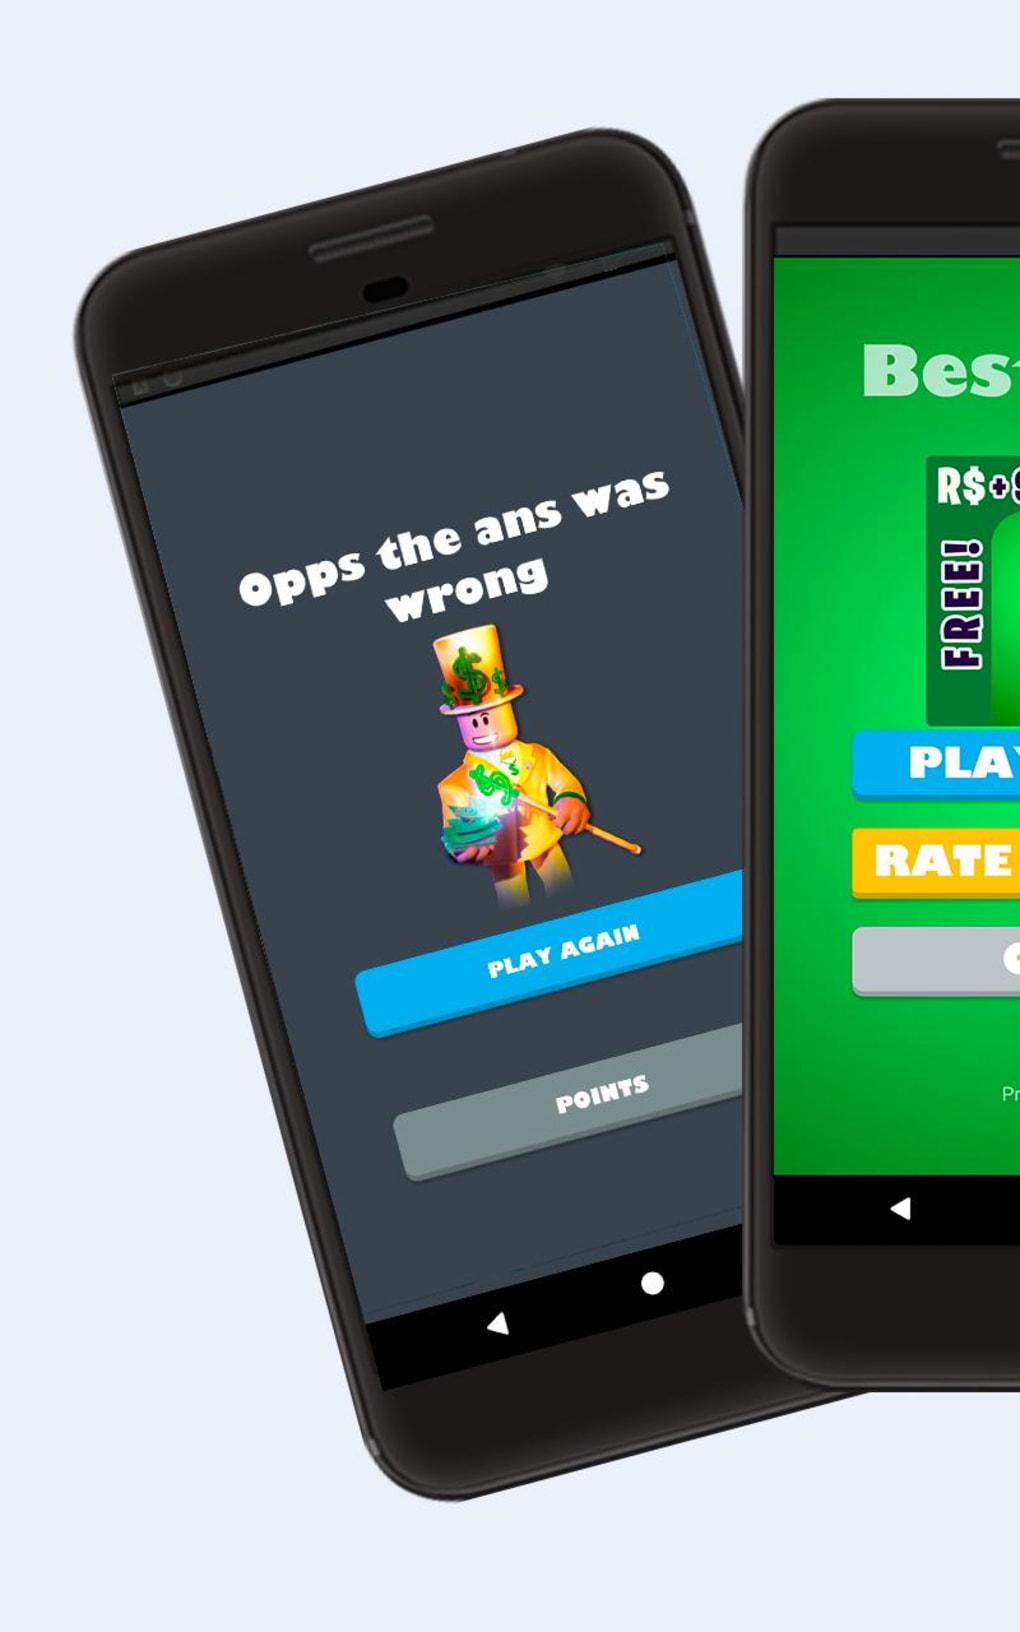 About: Free Robux Quiz - Best Quizzes for Robux (Google Play